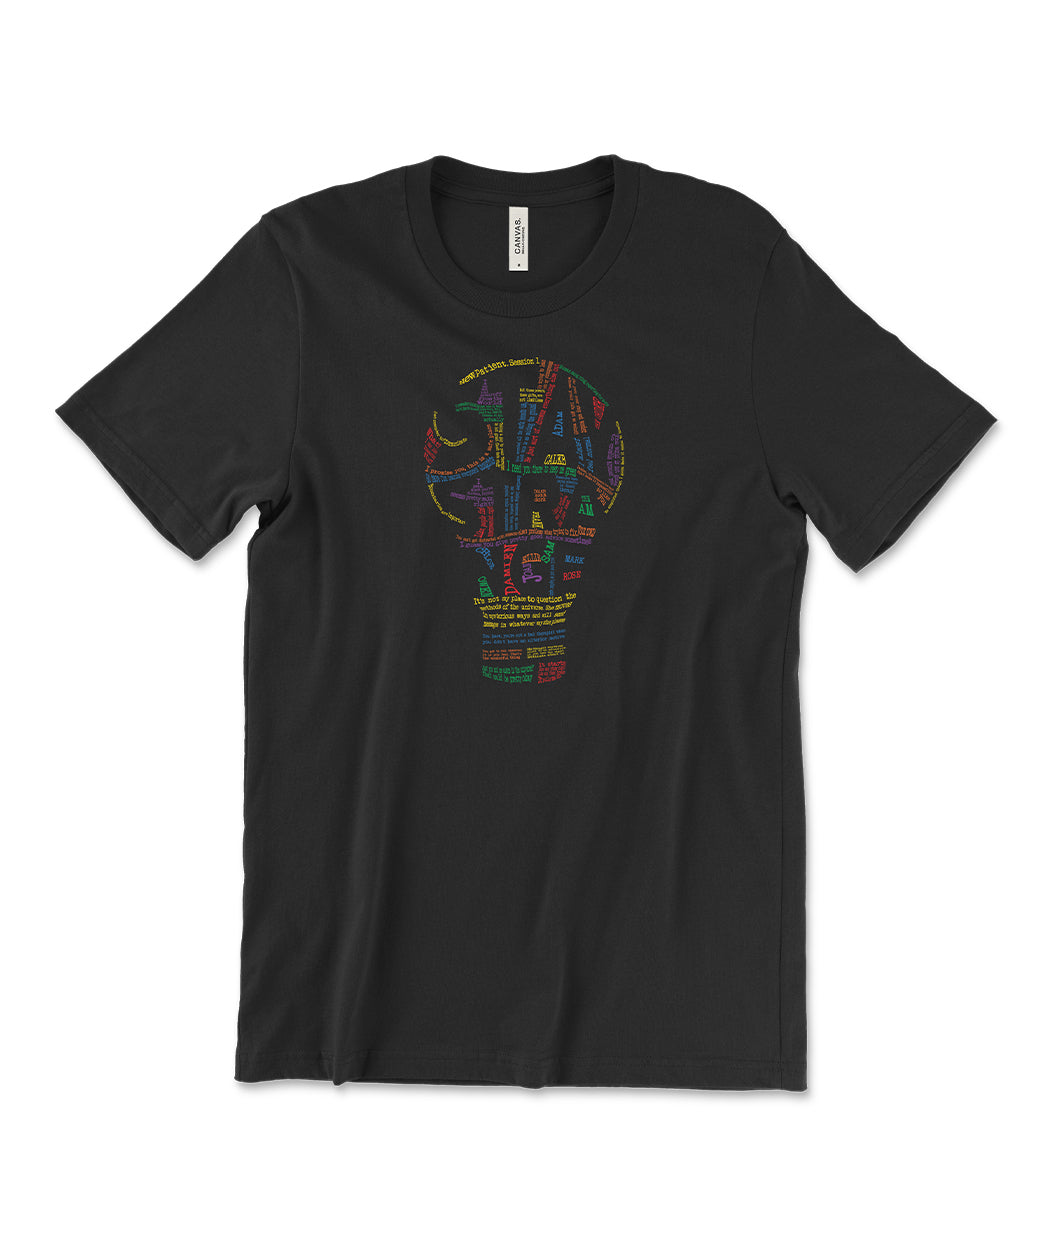 A black t-shirt with a lightbulb in the center made up of small, rainbow colored text with negative space that reads 